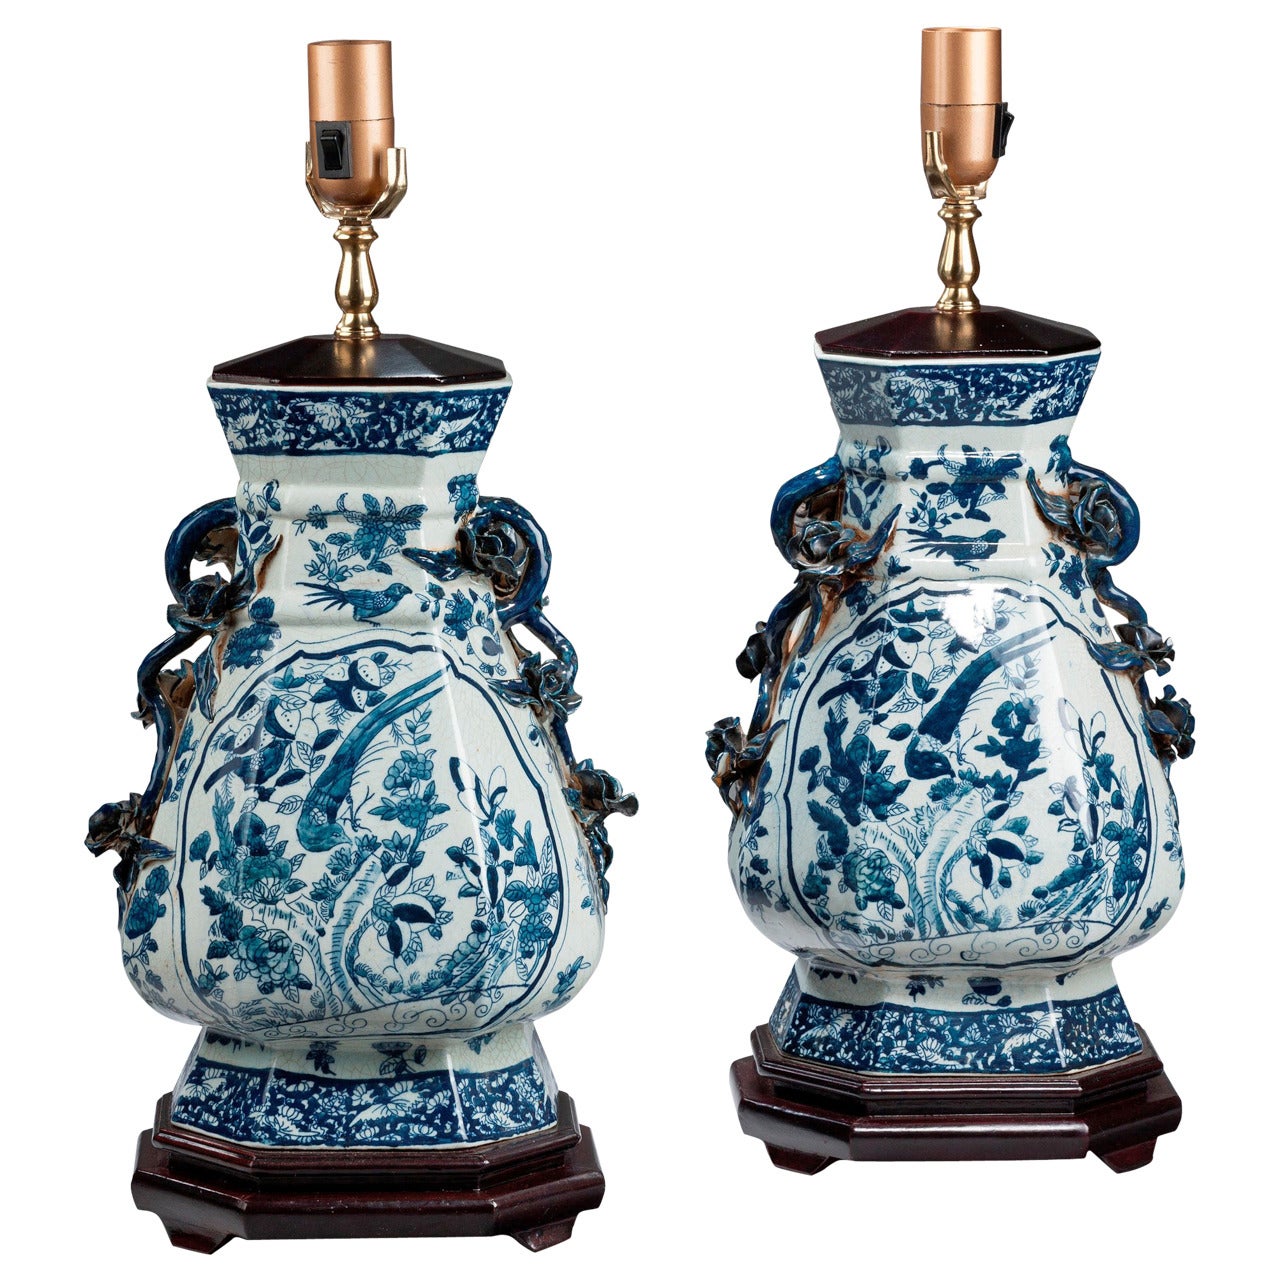 Pair of late 20th century 'Delph Style' Crackle Ware Lamps